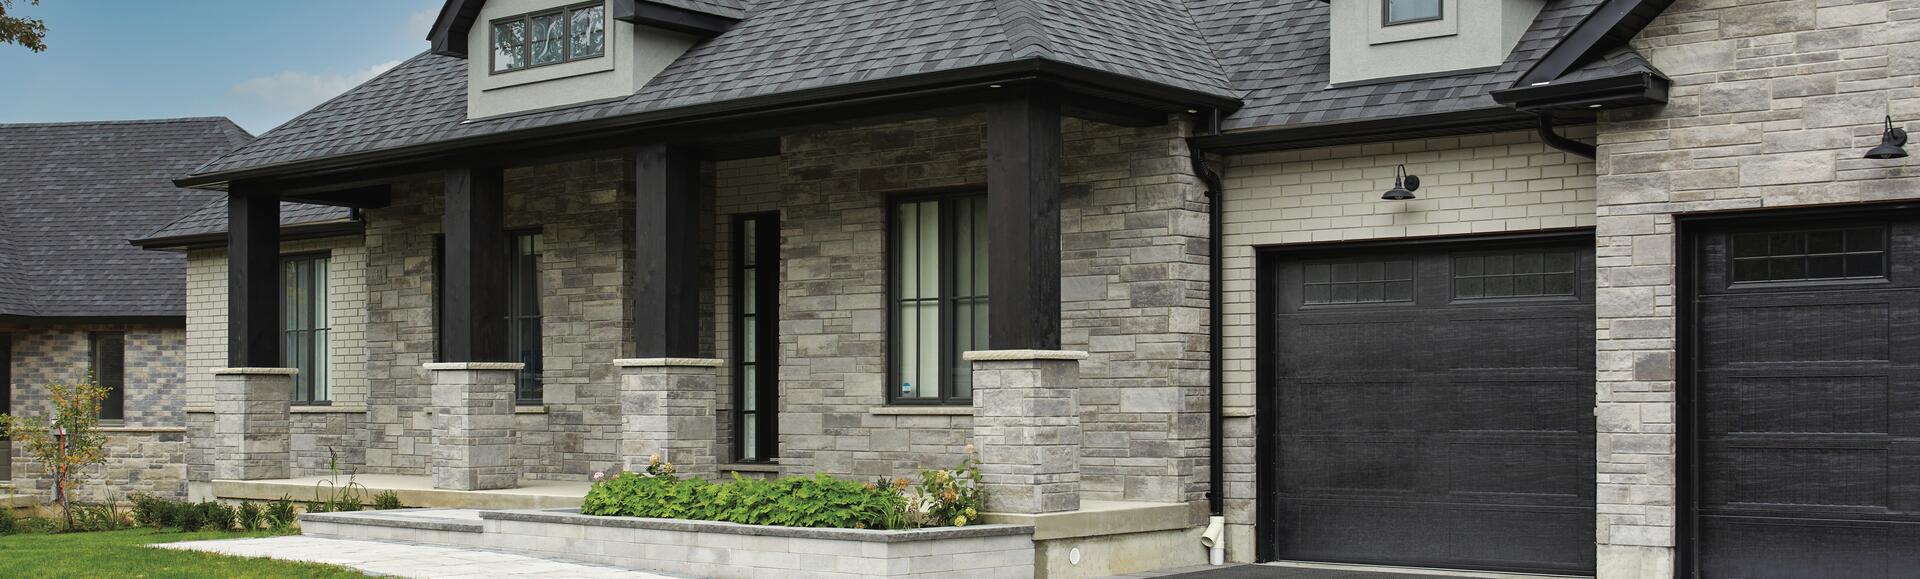 House using Granada stone and Contempo stone PRP products from Brampton Brick 